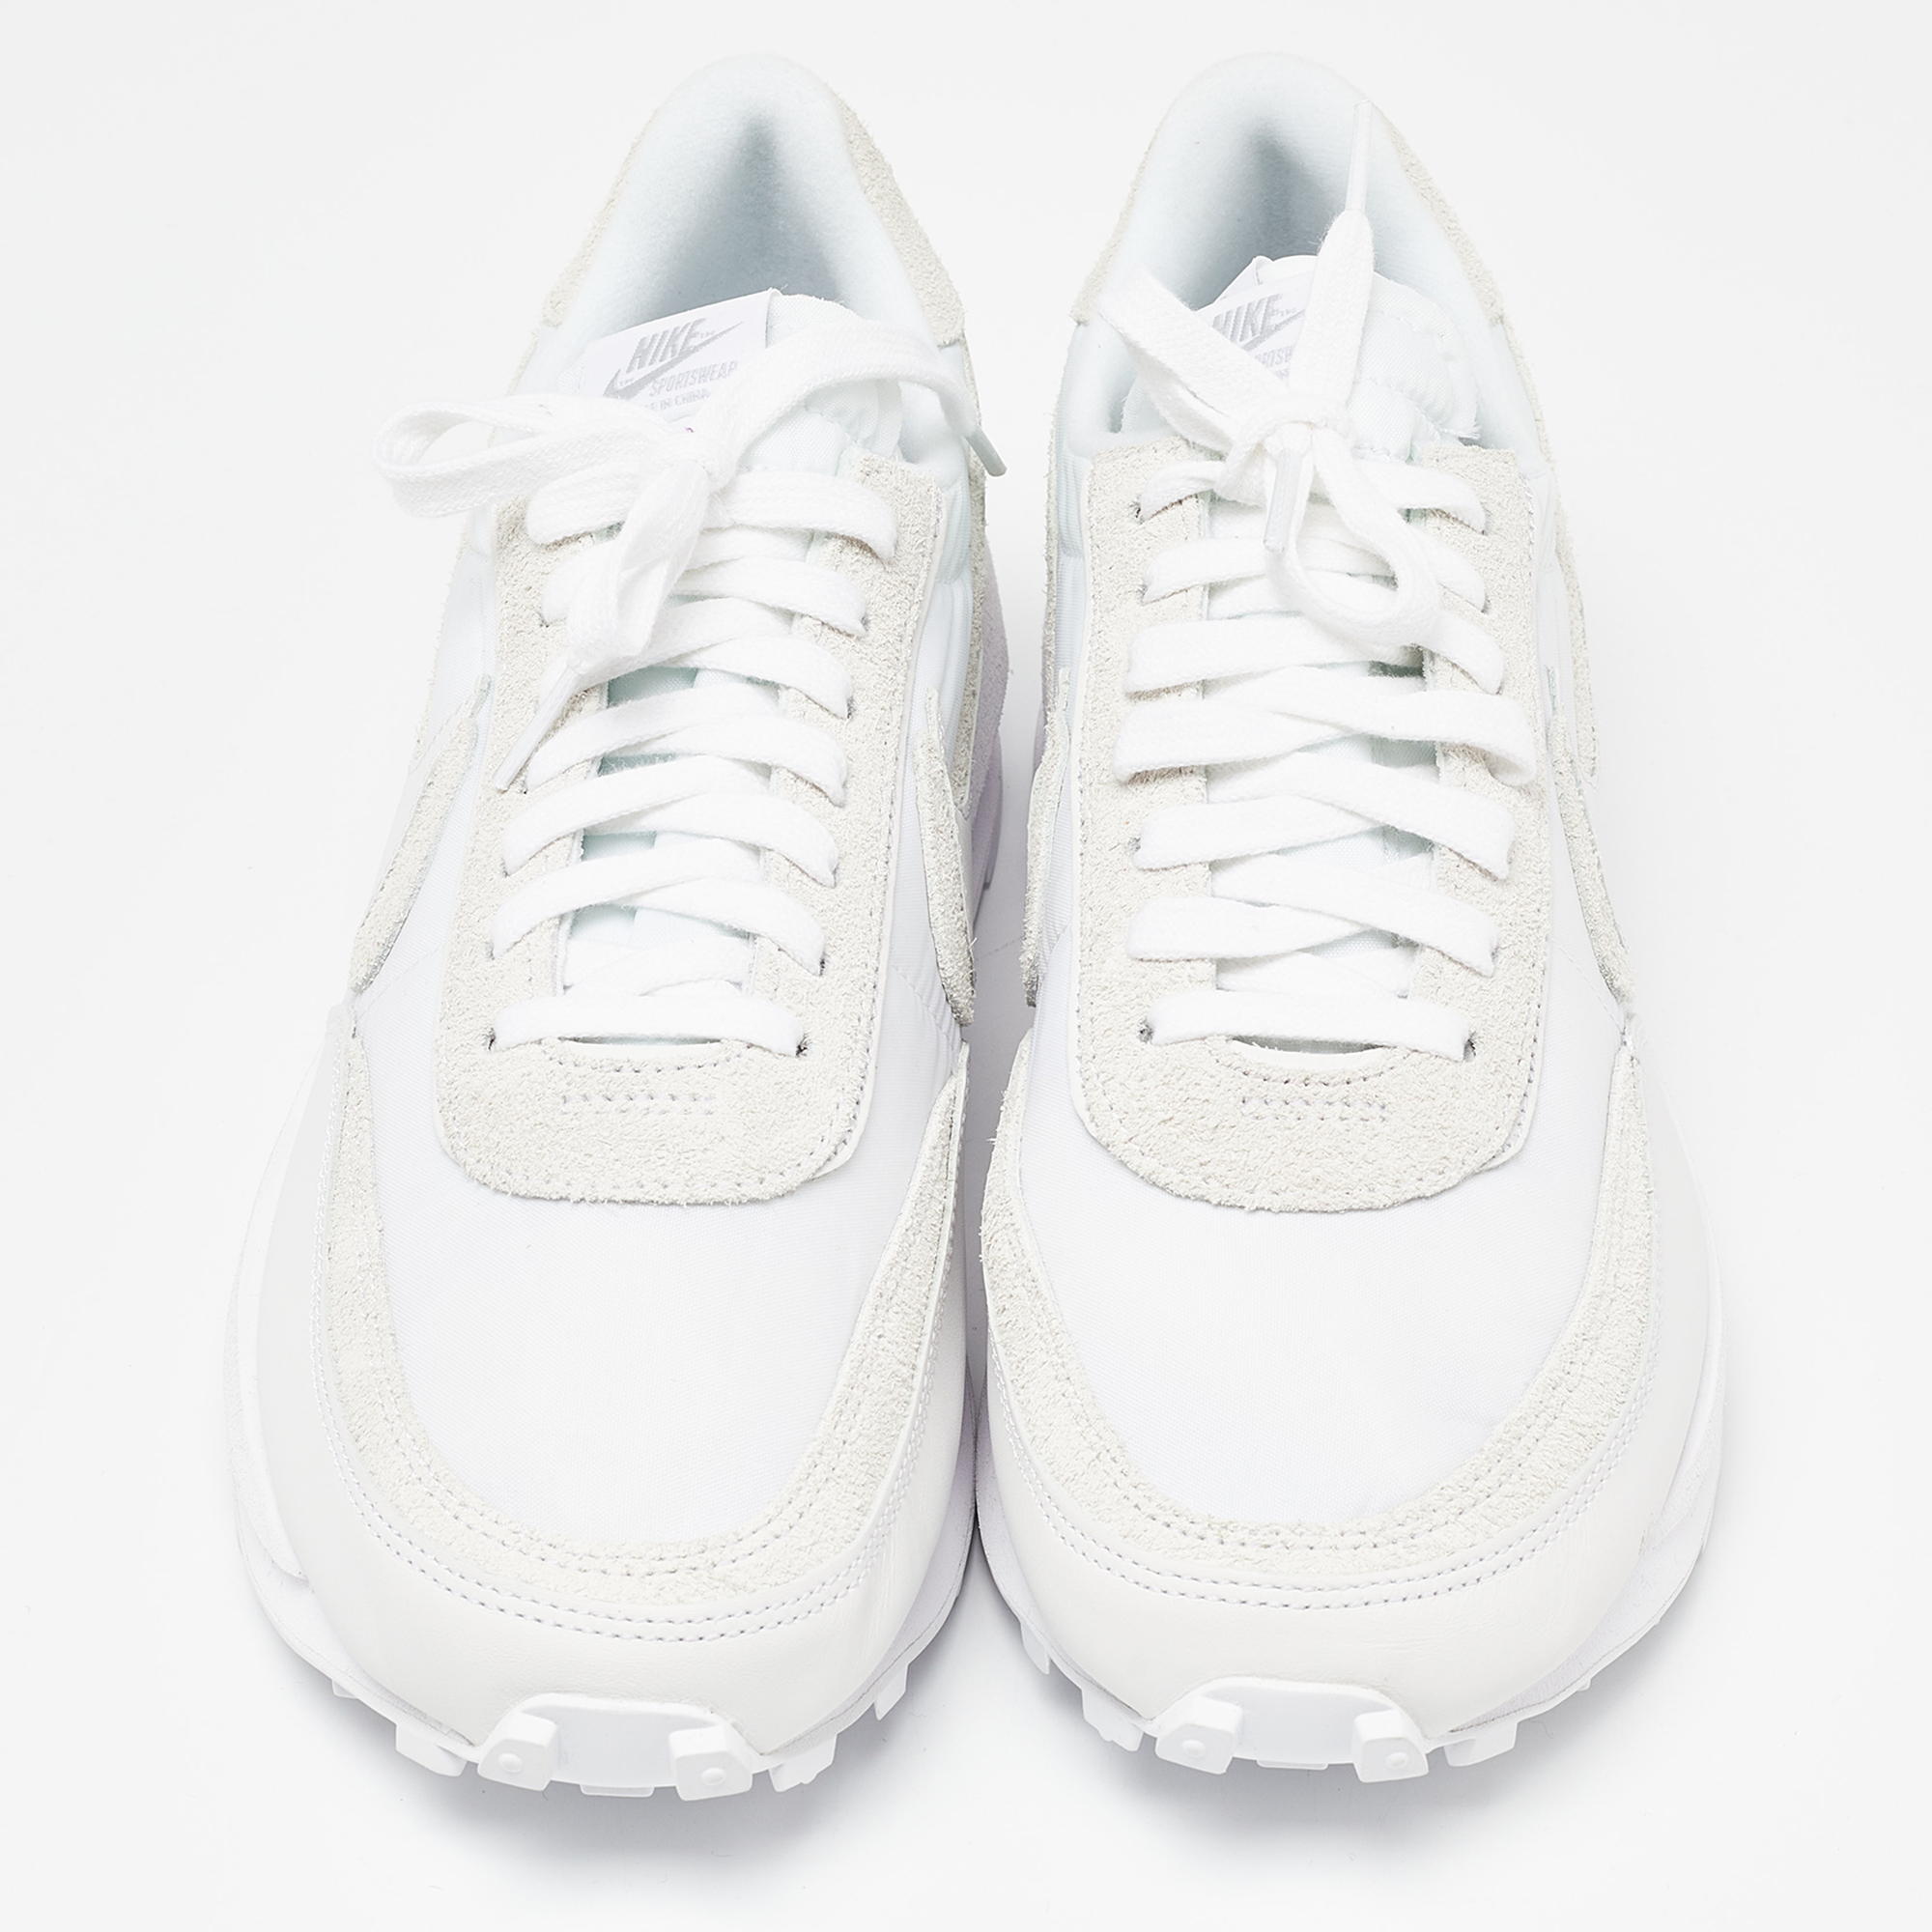 Nike X Sacai White Suede,Leather And Nylon LD Waffle Sneakers Size 46